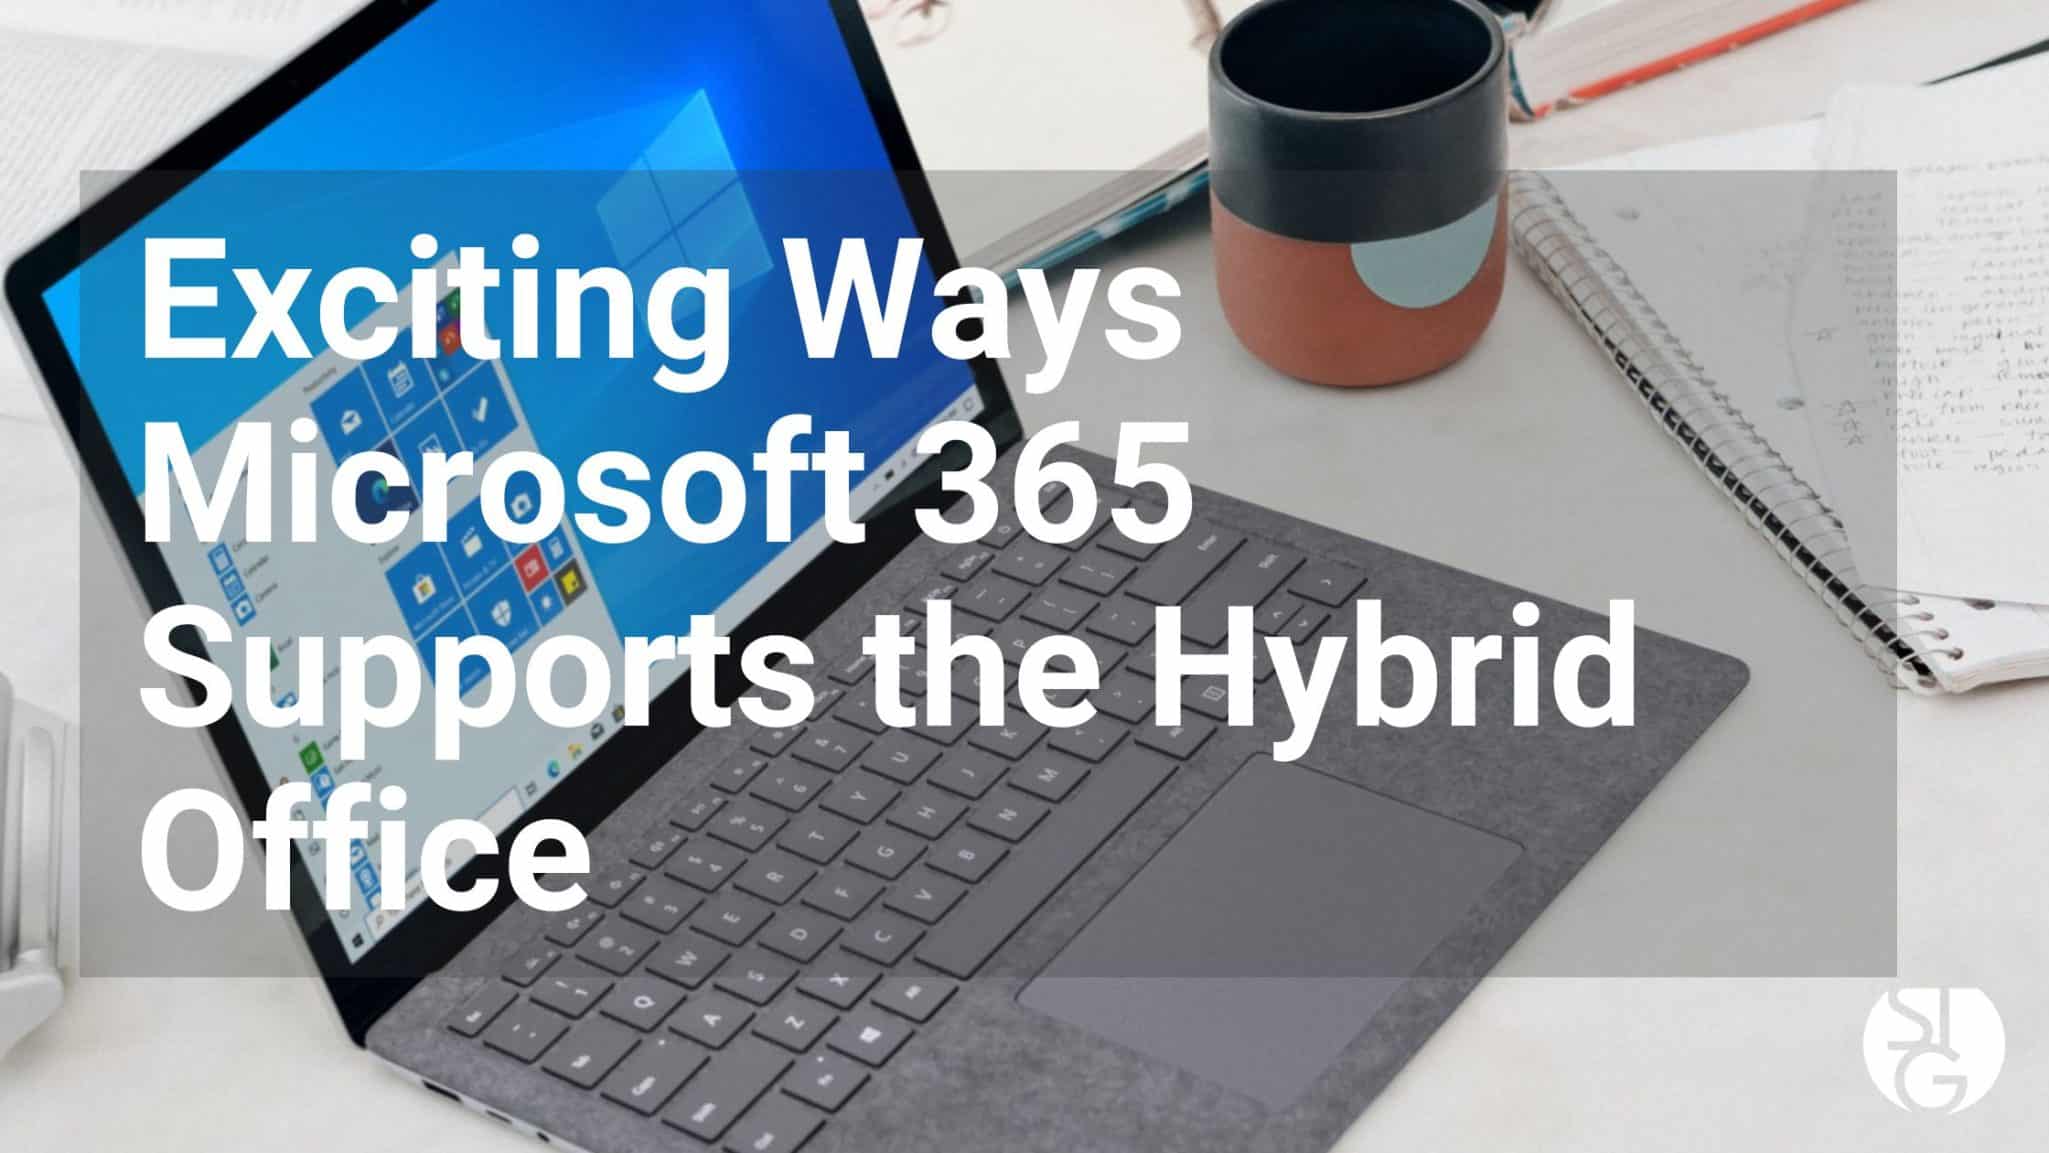 Exciting Ways Microsoft 365 Supports the Hybrid Office